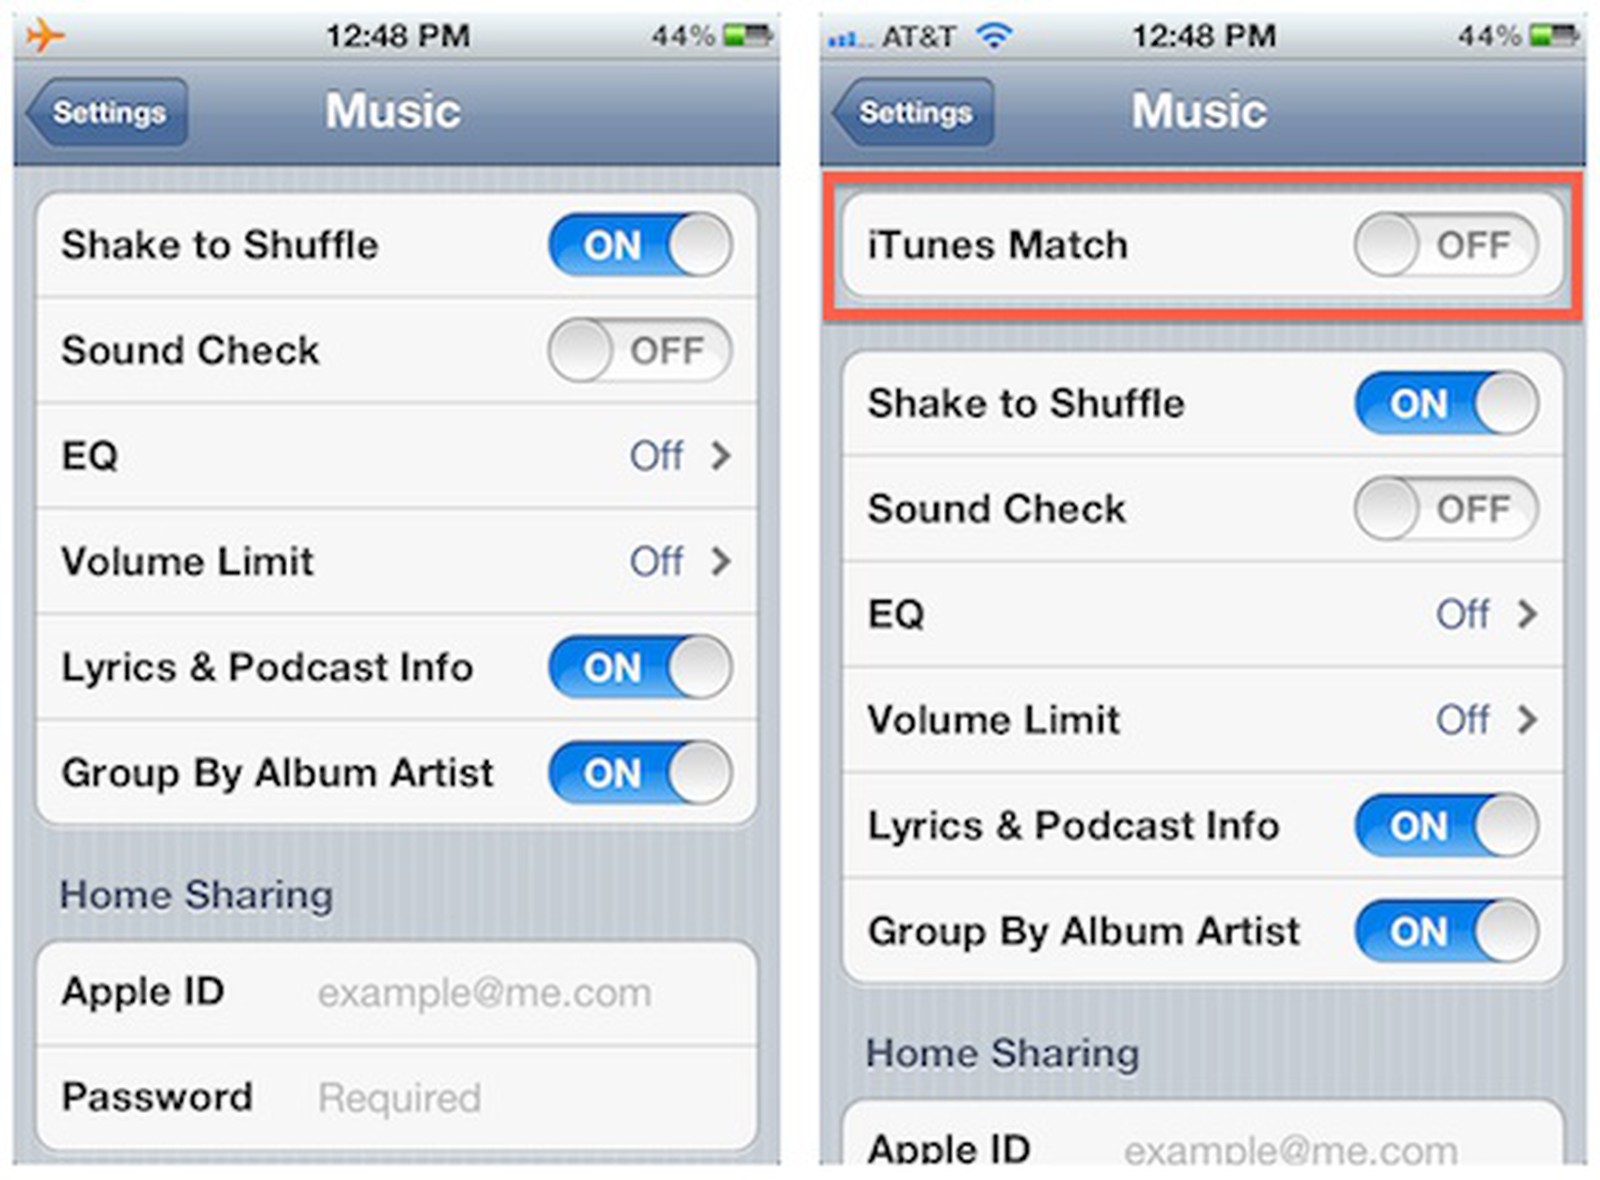 Apple Activates iTunes Match Setting in iOS 5, Suggesting Imminent Launch